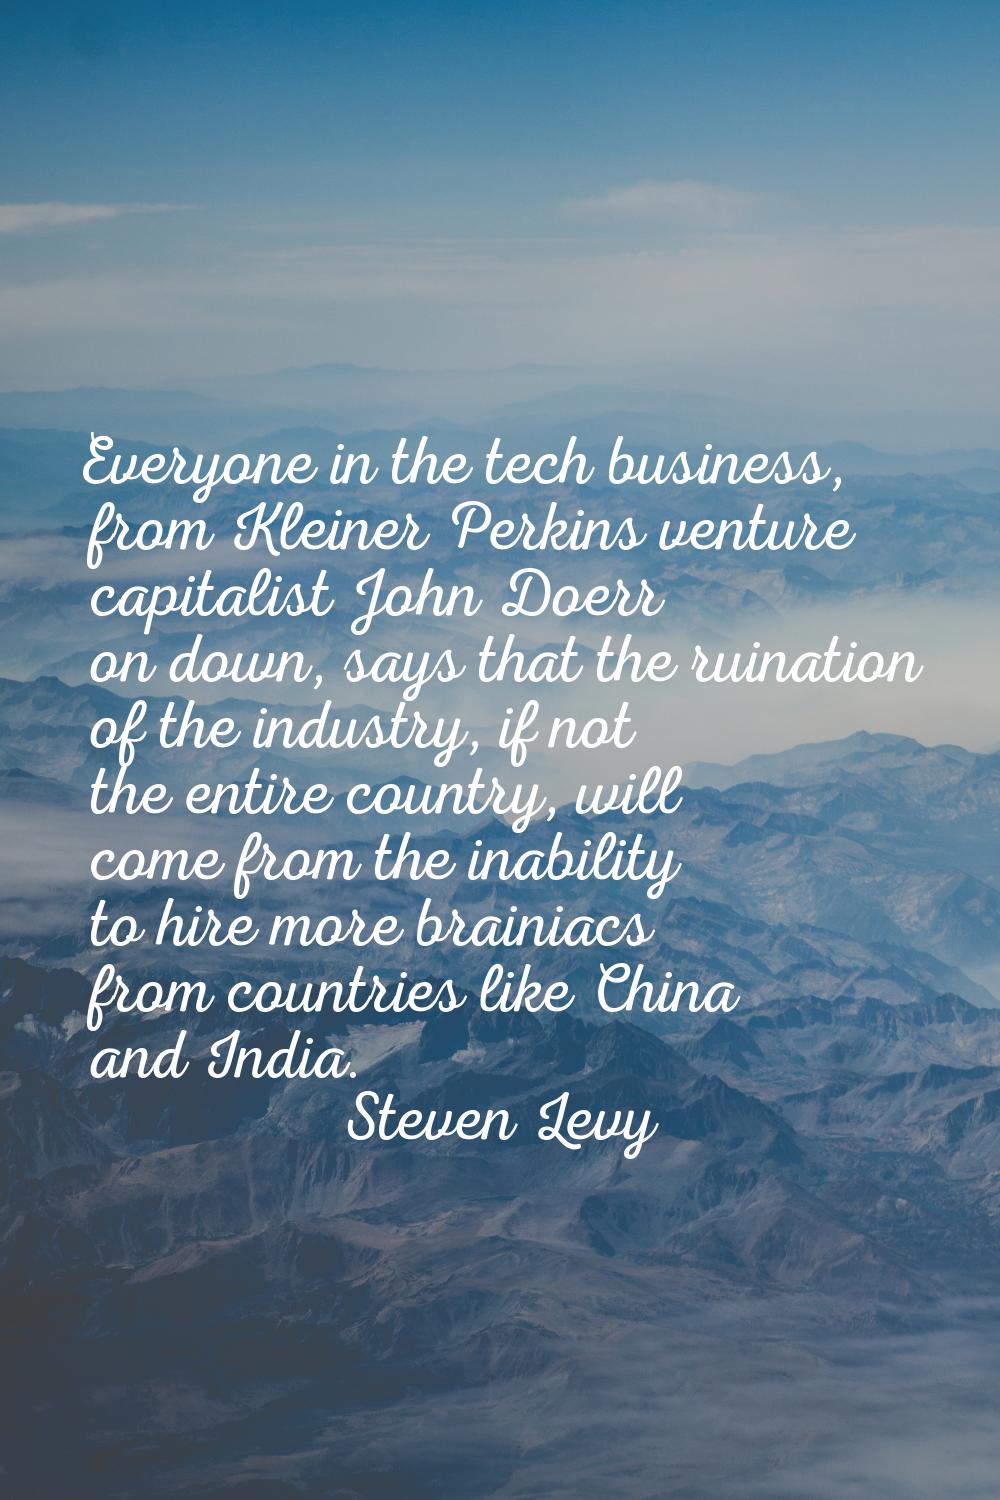 Everyone in the tech business, from Kleiner Perkins venture capitalist John Doerr on down, says tha